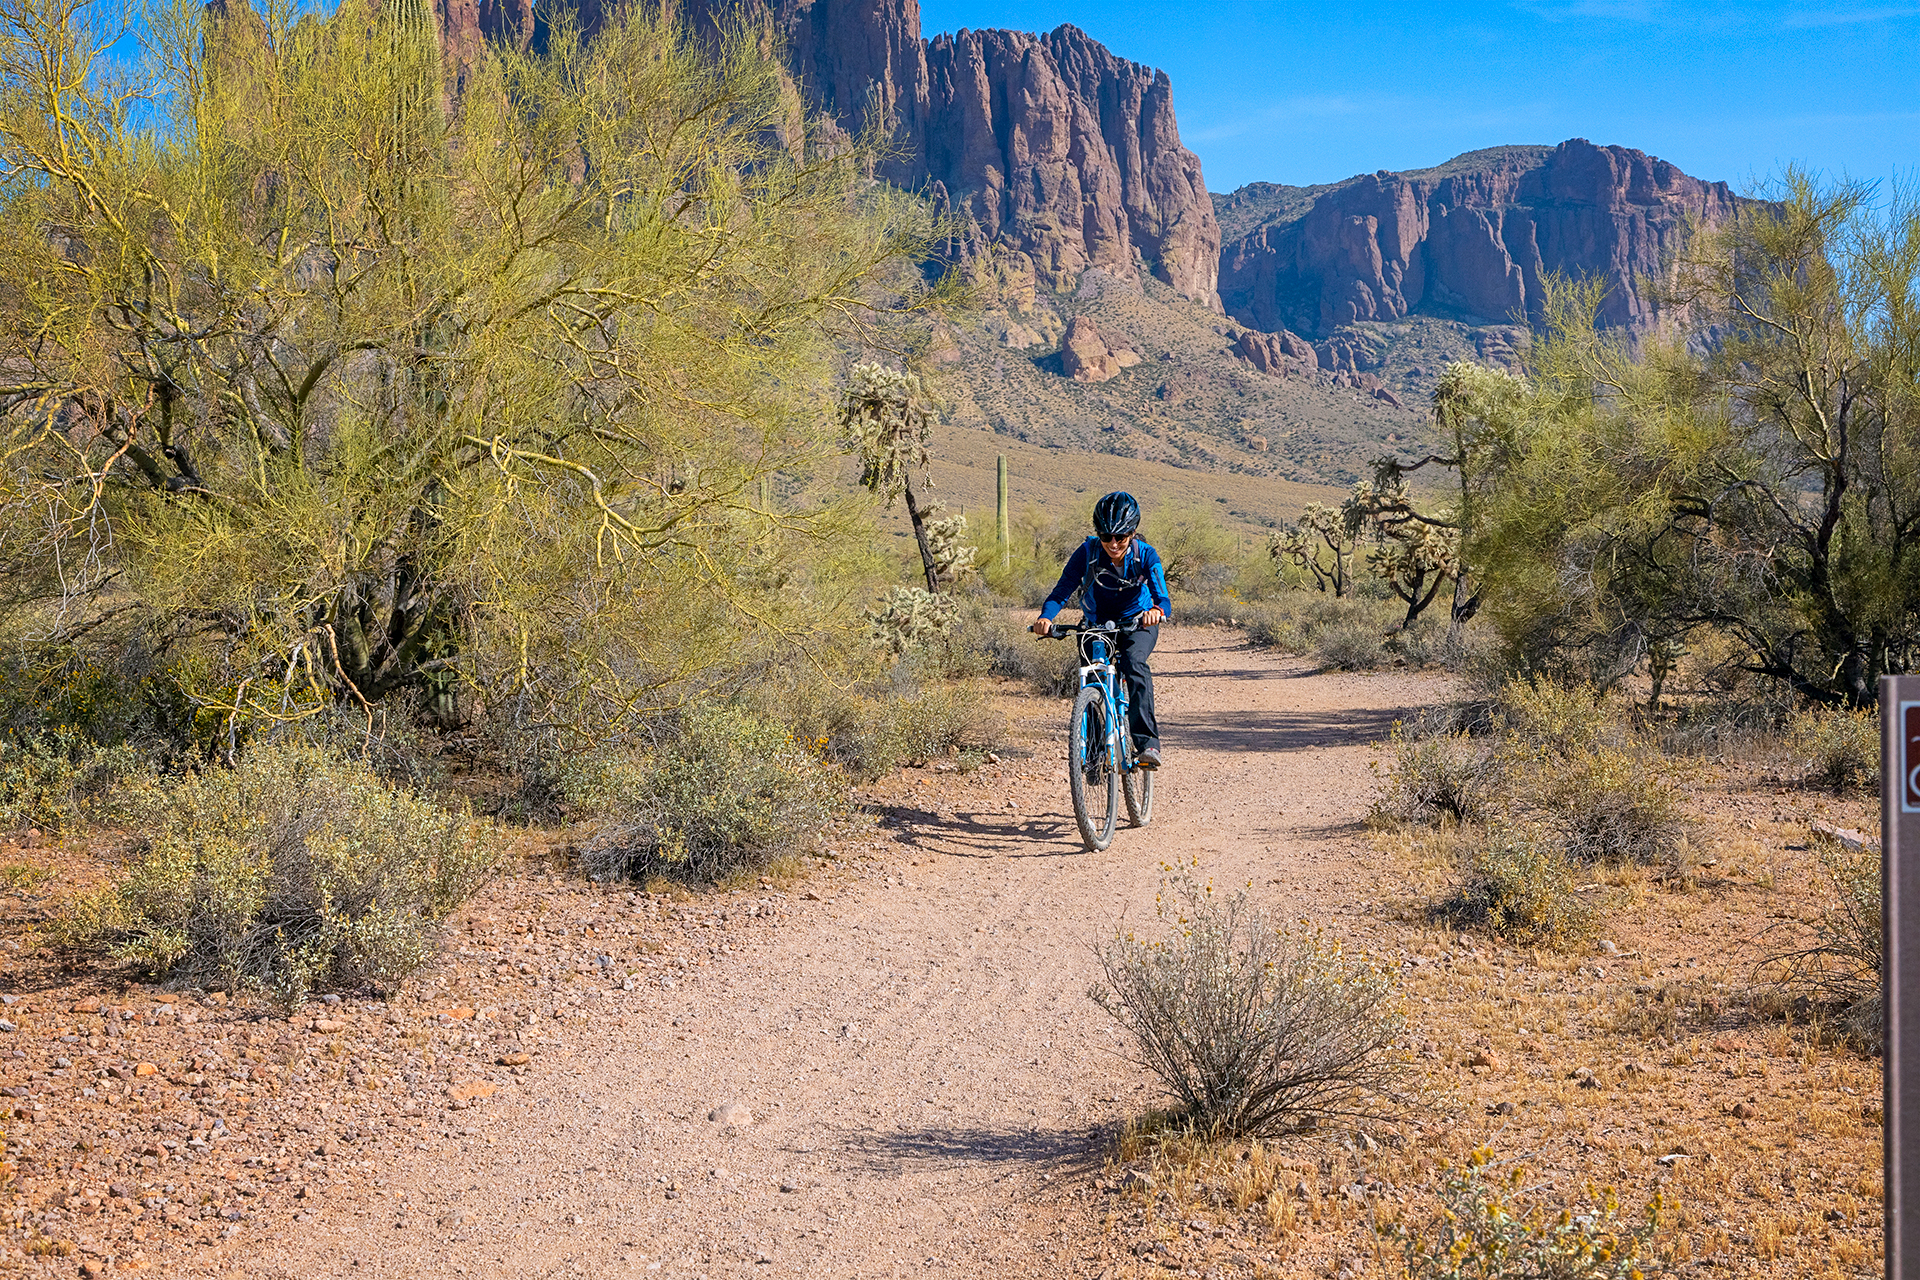 A person riding a bike on a desert trail bordered by palo verde trees in front of a mountain range.